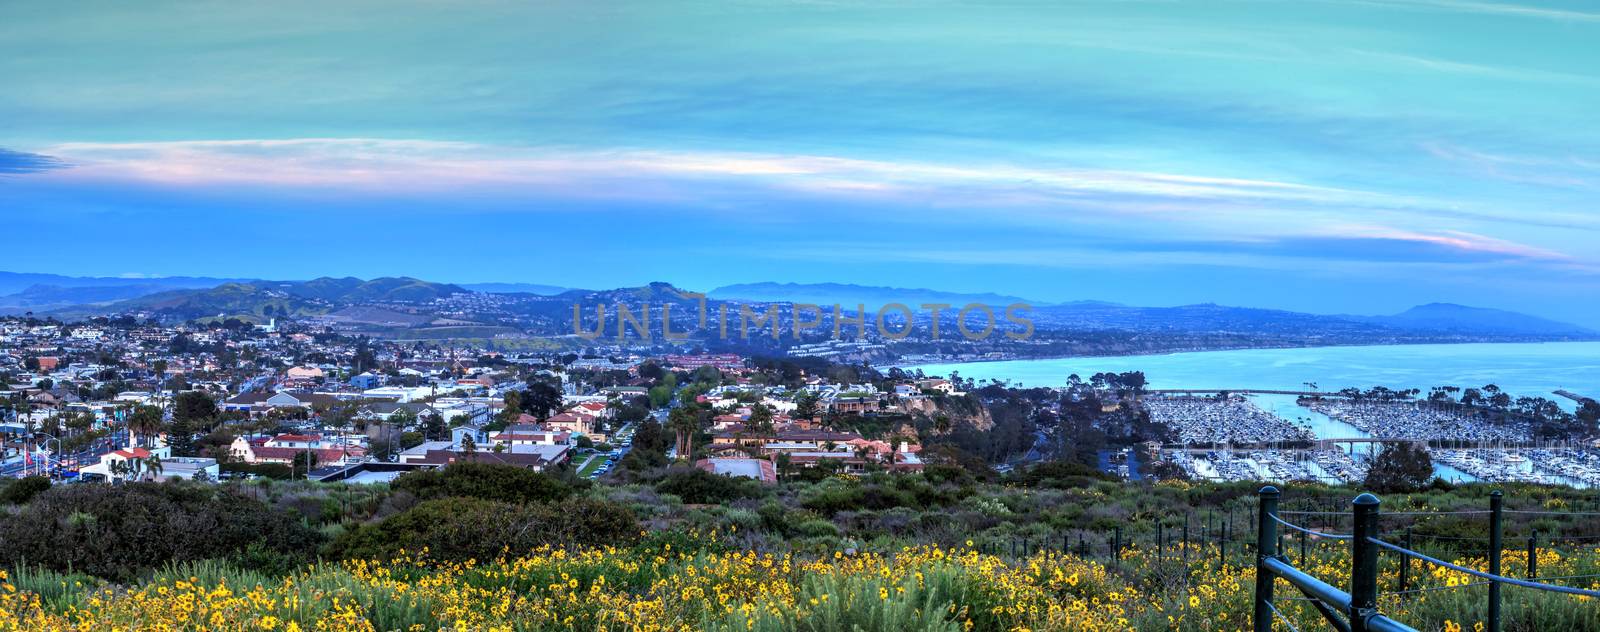 Hiking trail above Dana Point harbor at sunset in Southern California, USA